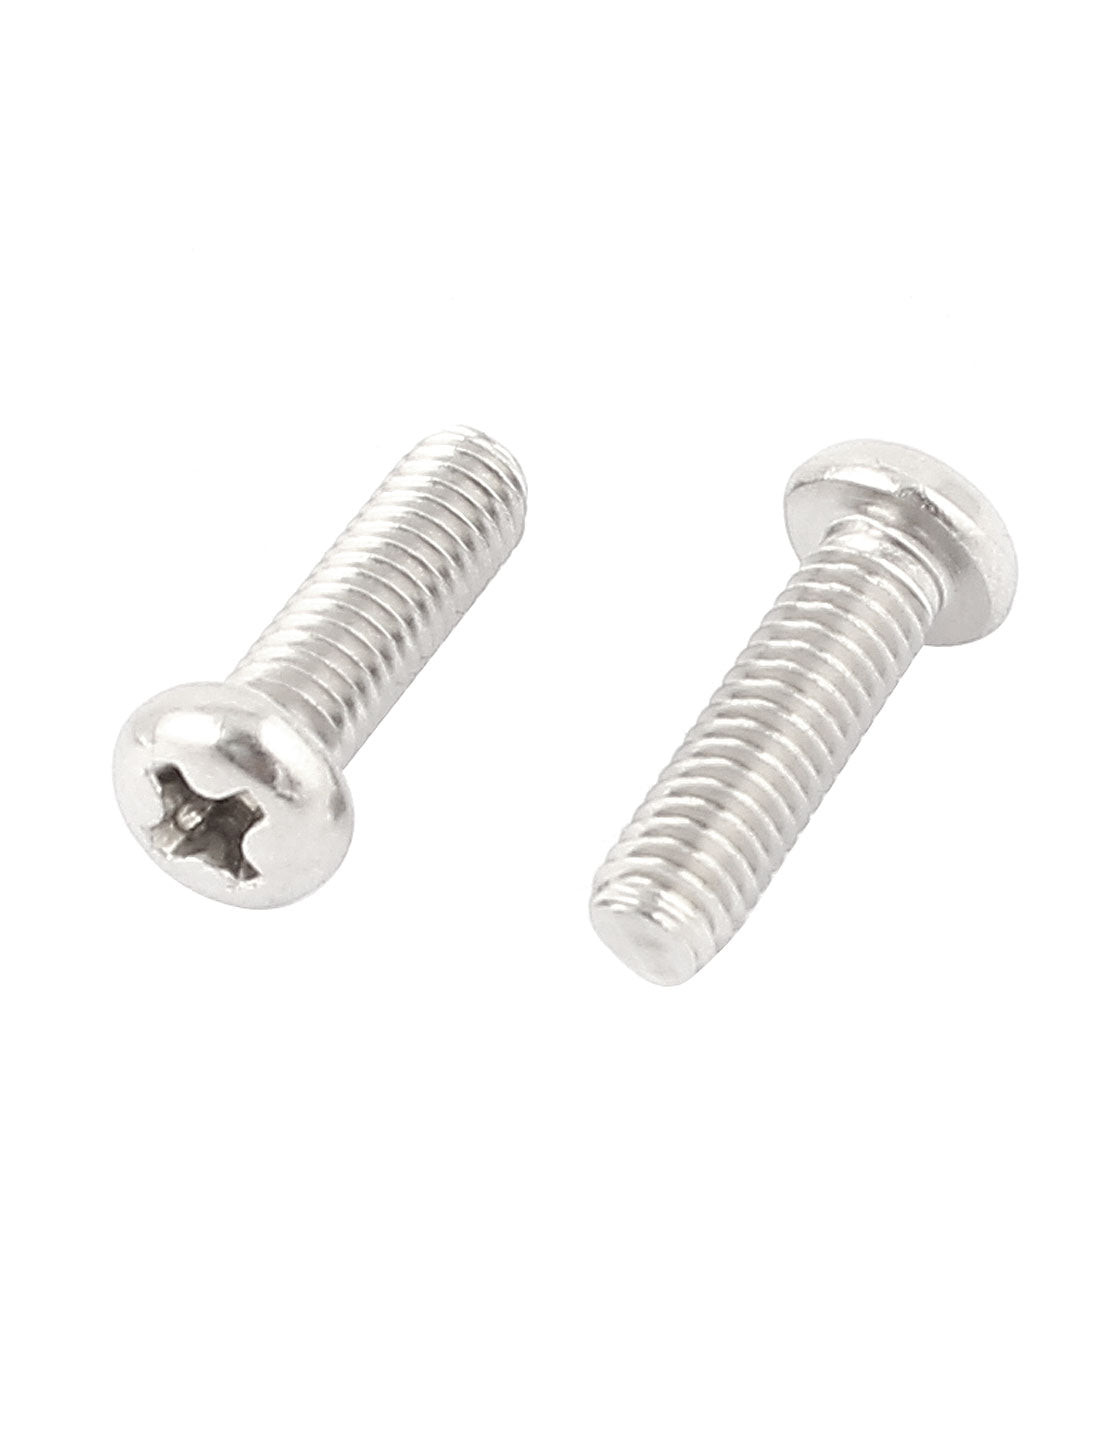 uxcell Uxcell M4 x 14mm 304 Stainless Steel Crosshead Phillips Round Head Screws Bolts 60pcs